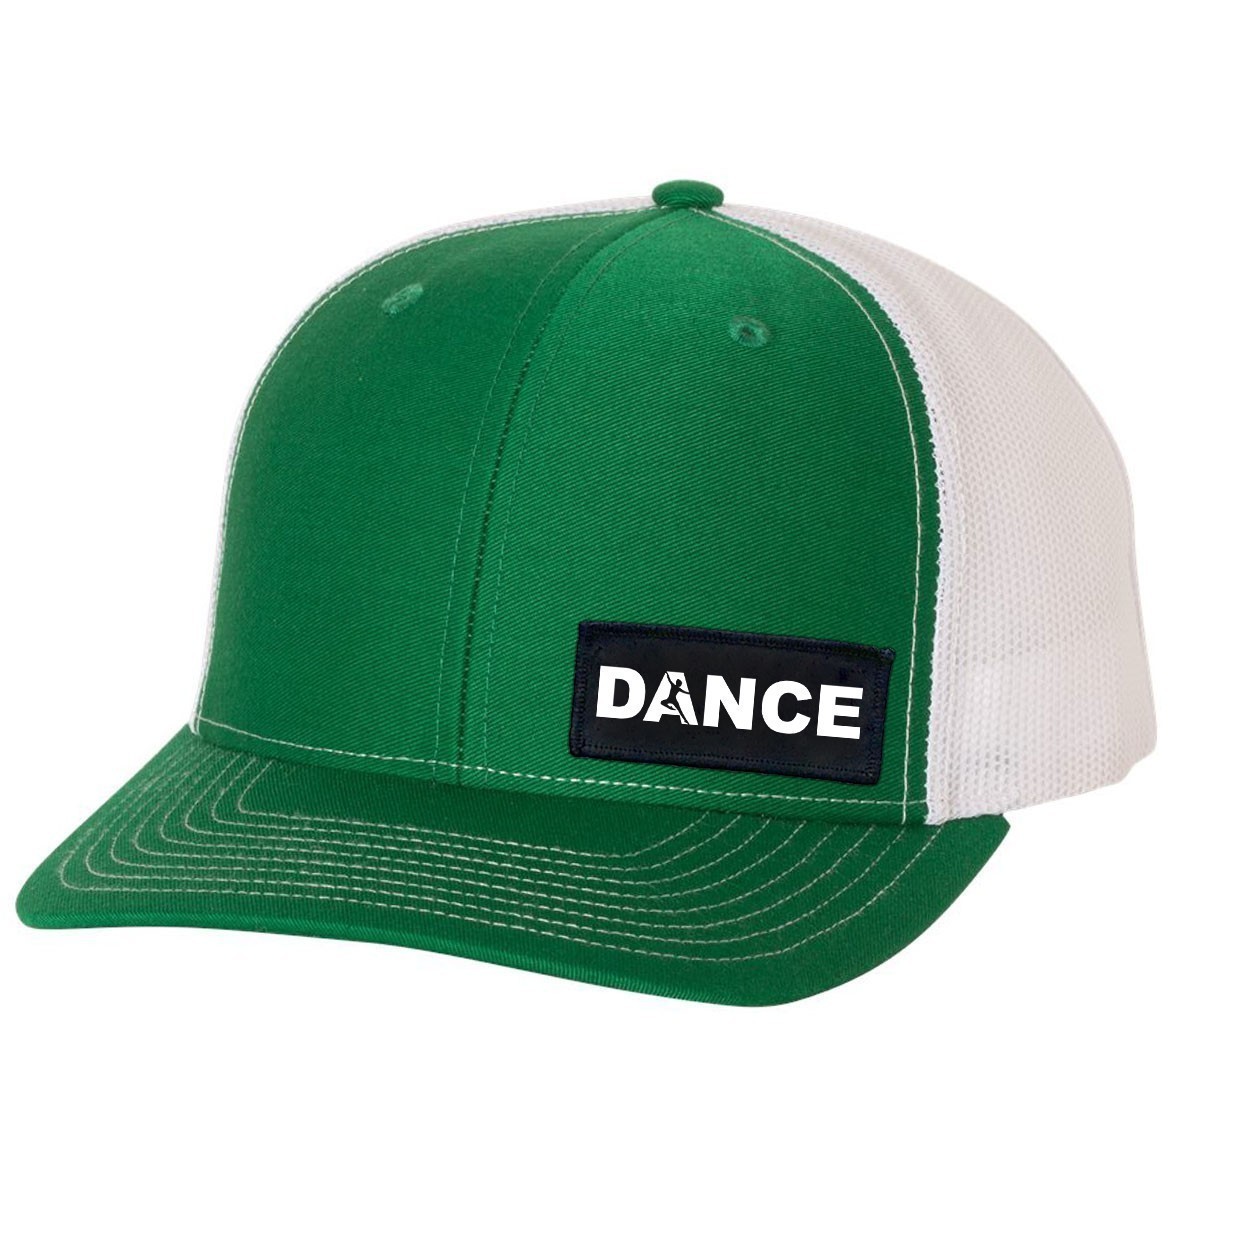 Dance Silhouette Logo Night Out Woven Patch Snapback Trucker Hat Green/White (White Logo)